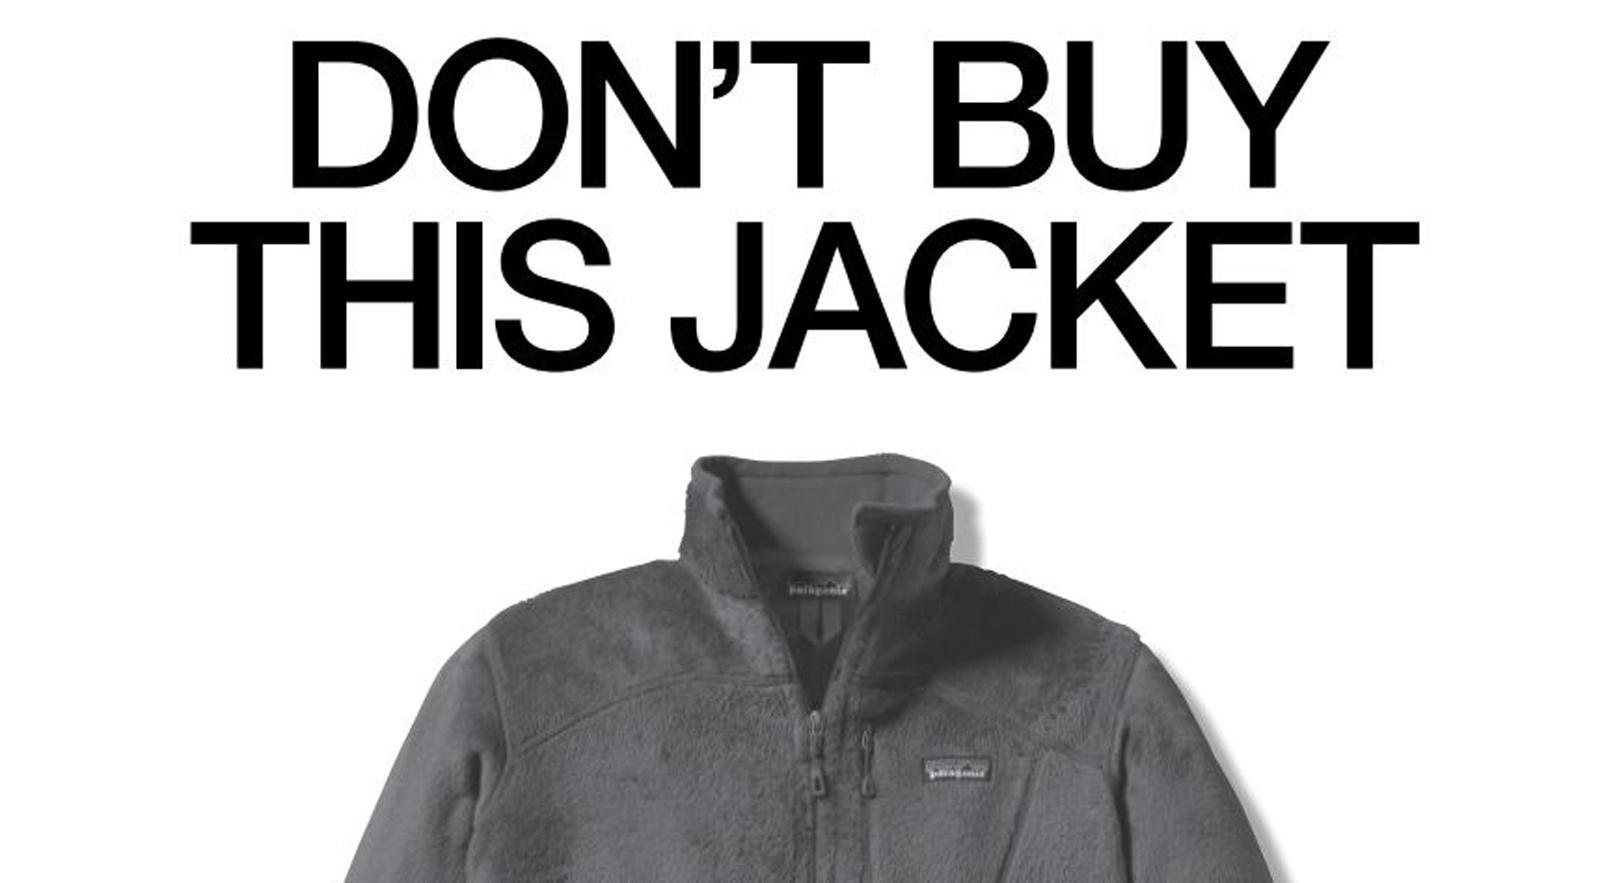 Don't Buy This Jacket, Black Friday and the New York Times - Patagonia Stories